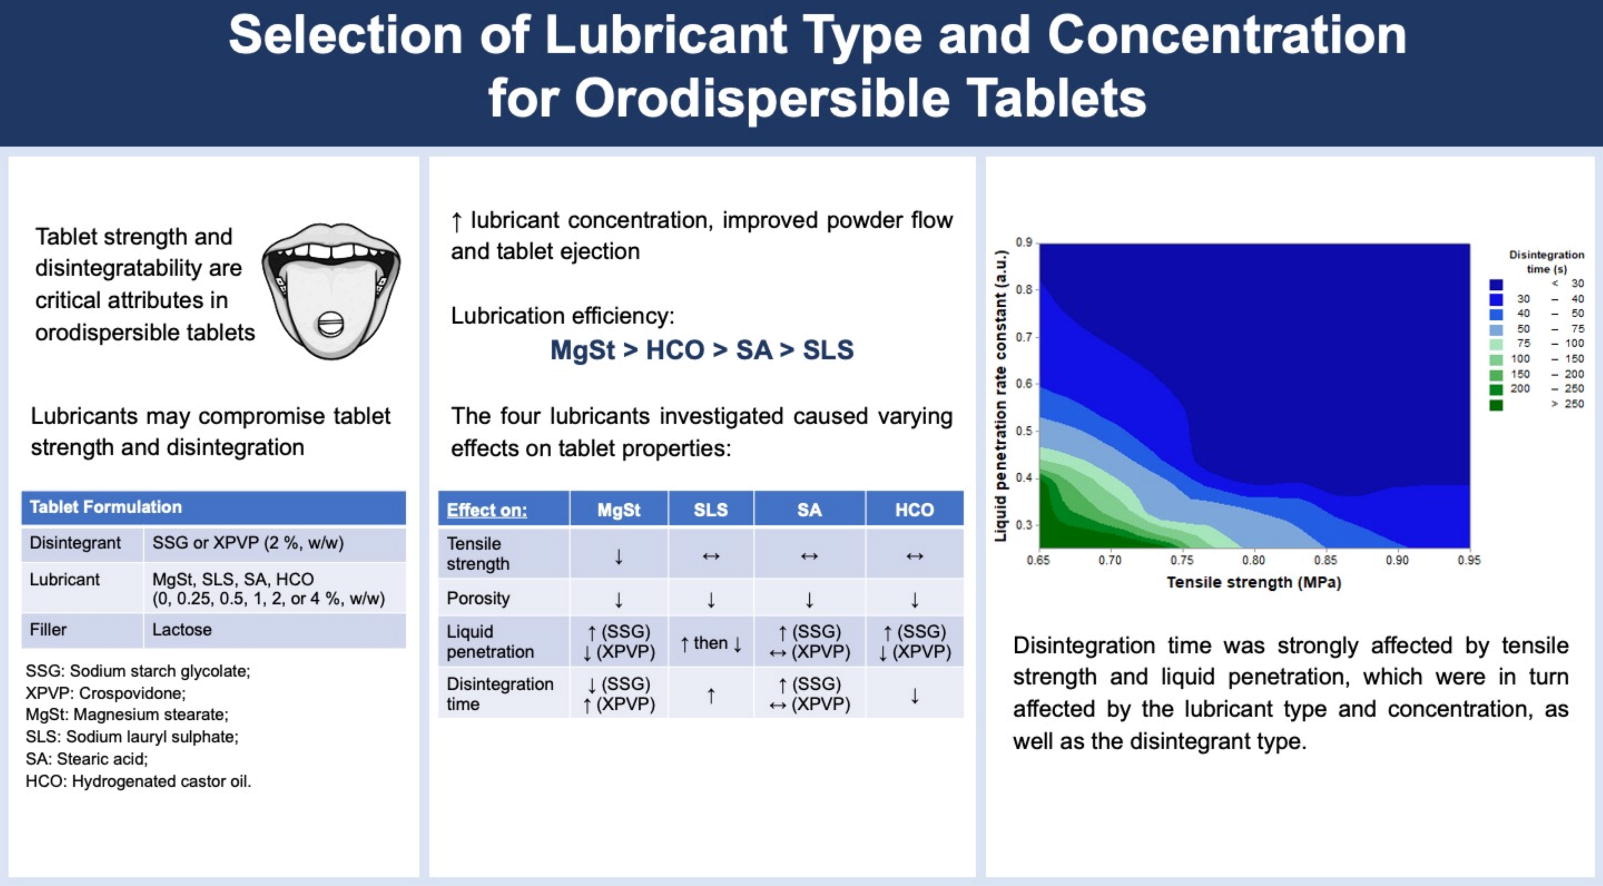 Selection of lubricant type and concentration for orodispersible tablets